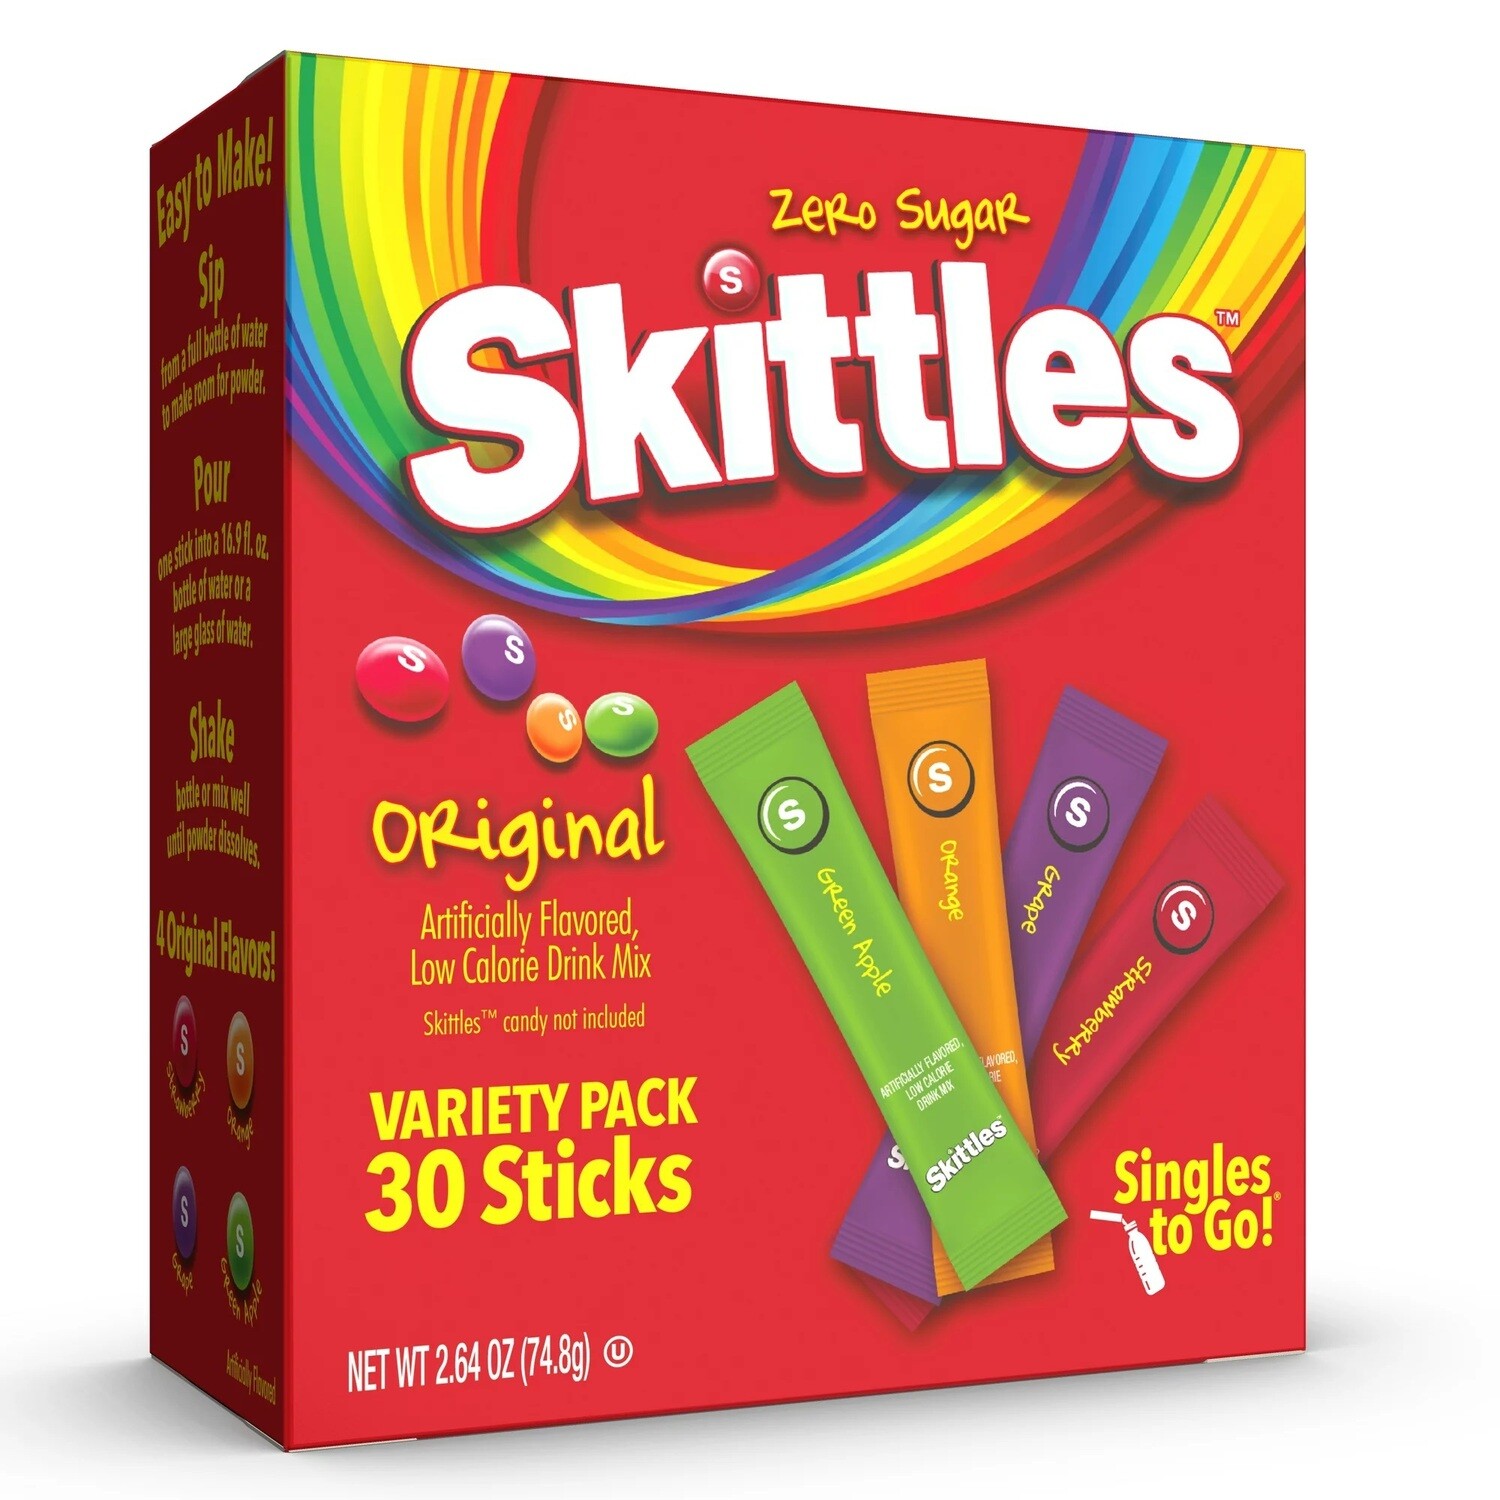 Skittles Singles to Go 30ct - (add to 16.9oz water)